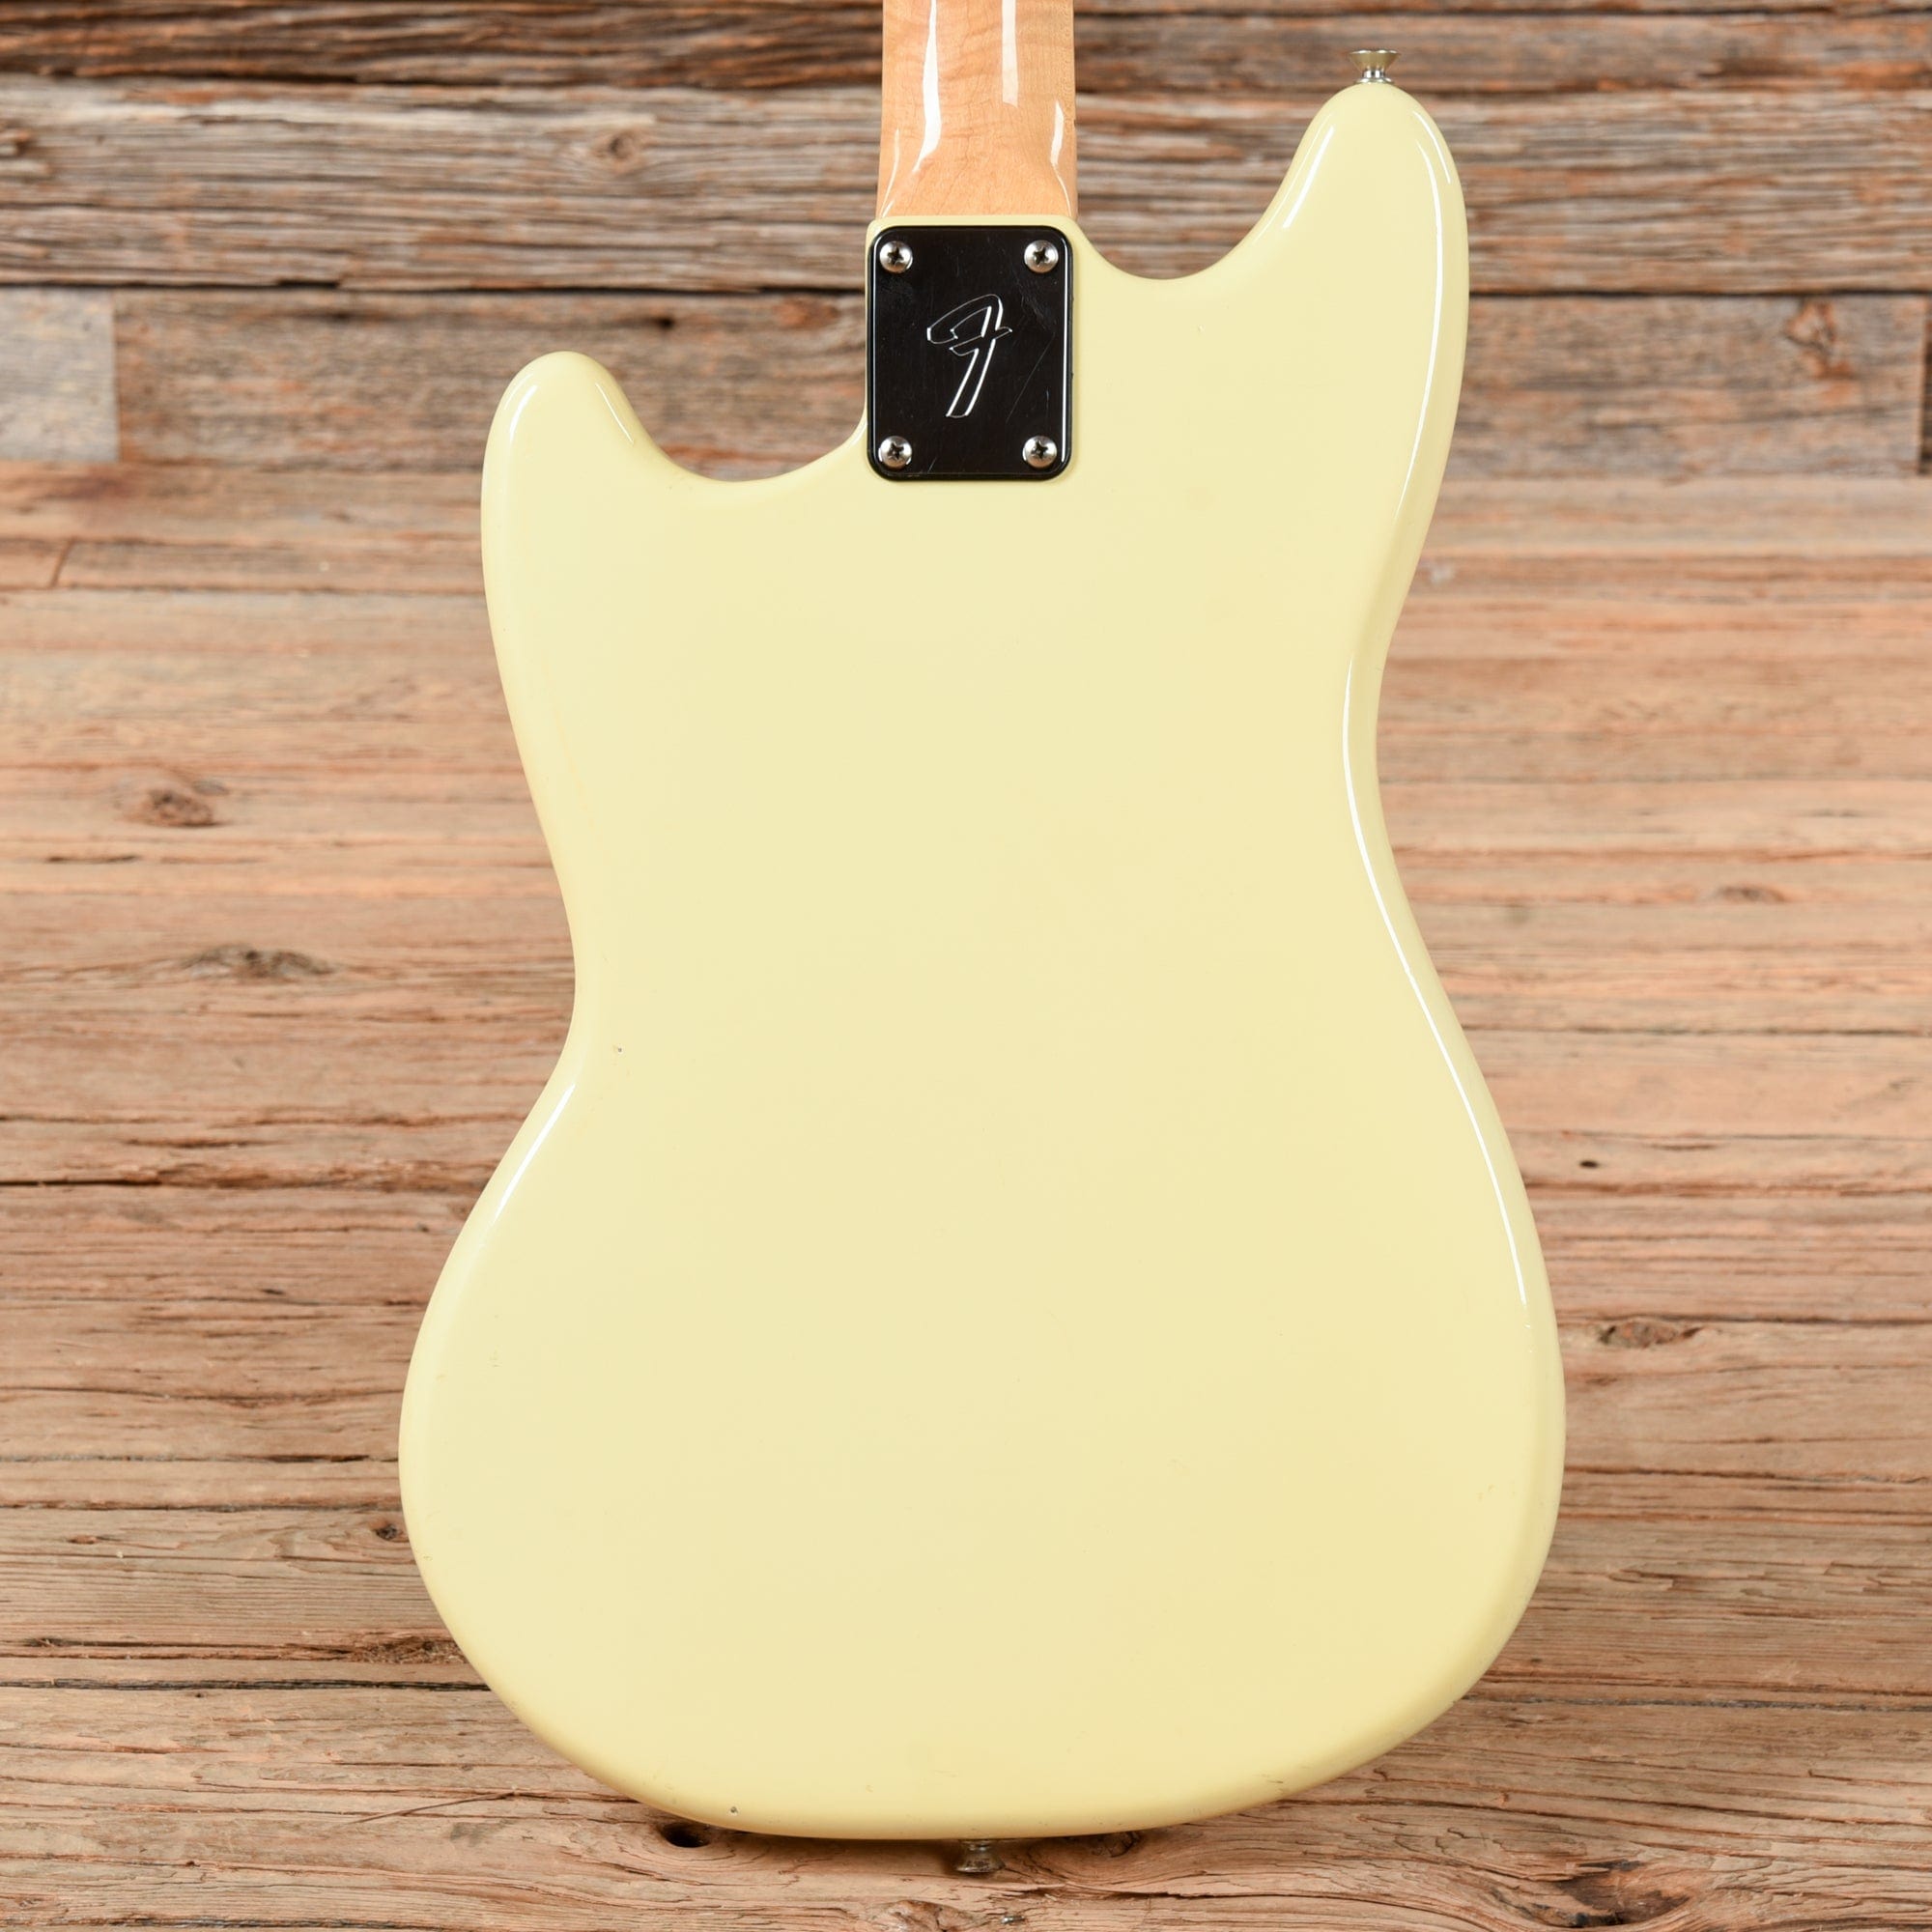 Fender Bronco White 1977 Electric Guitars / Solid Body